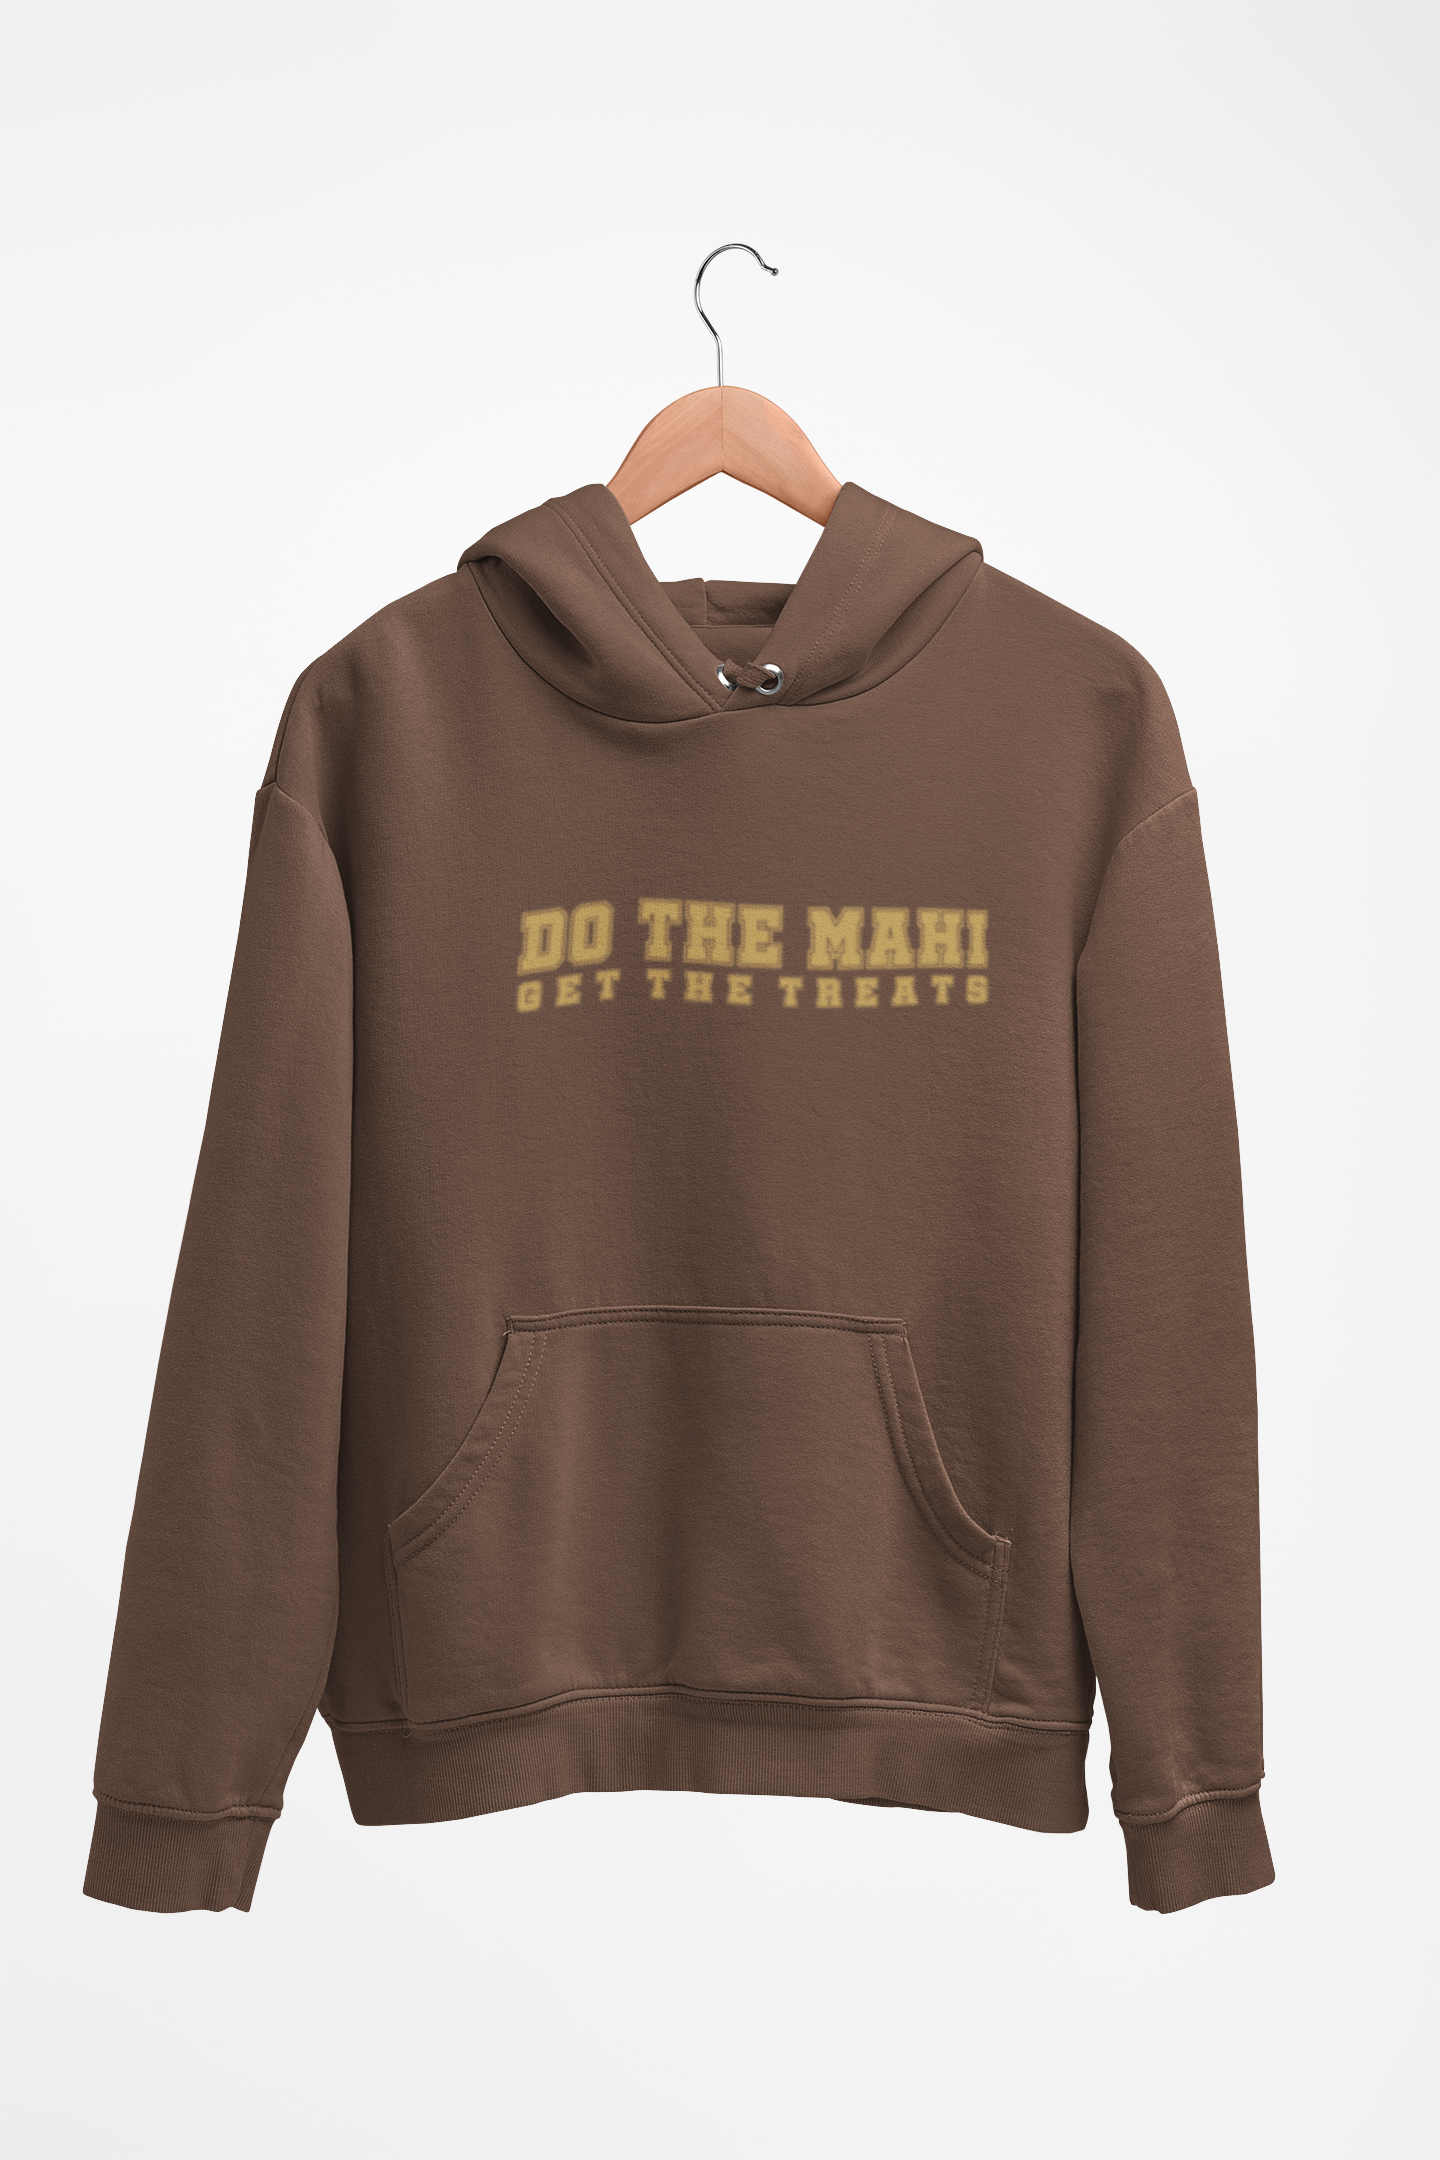 DTM, Get The Treats (gold text) - Adult Hoodie